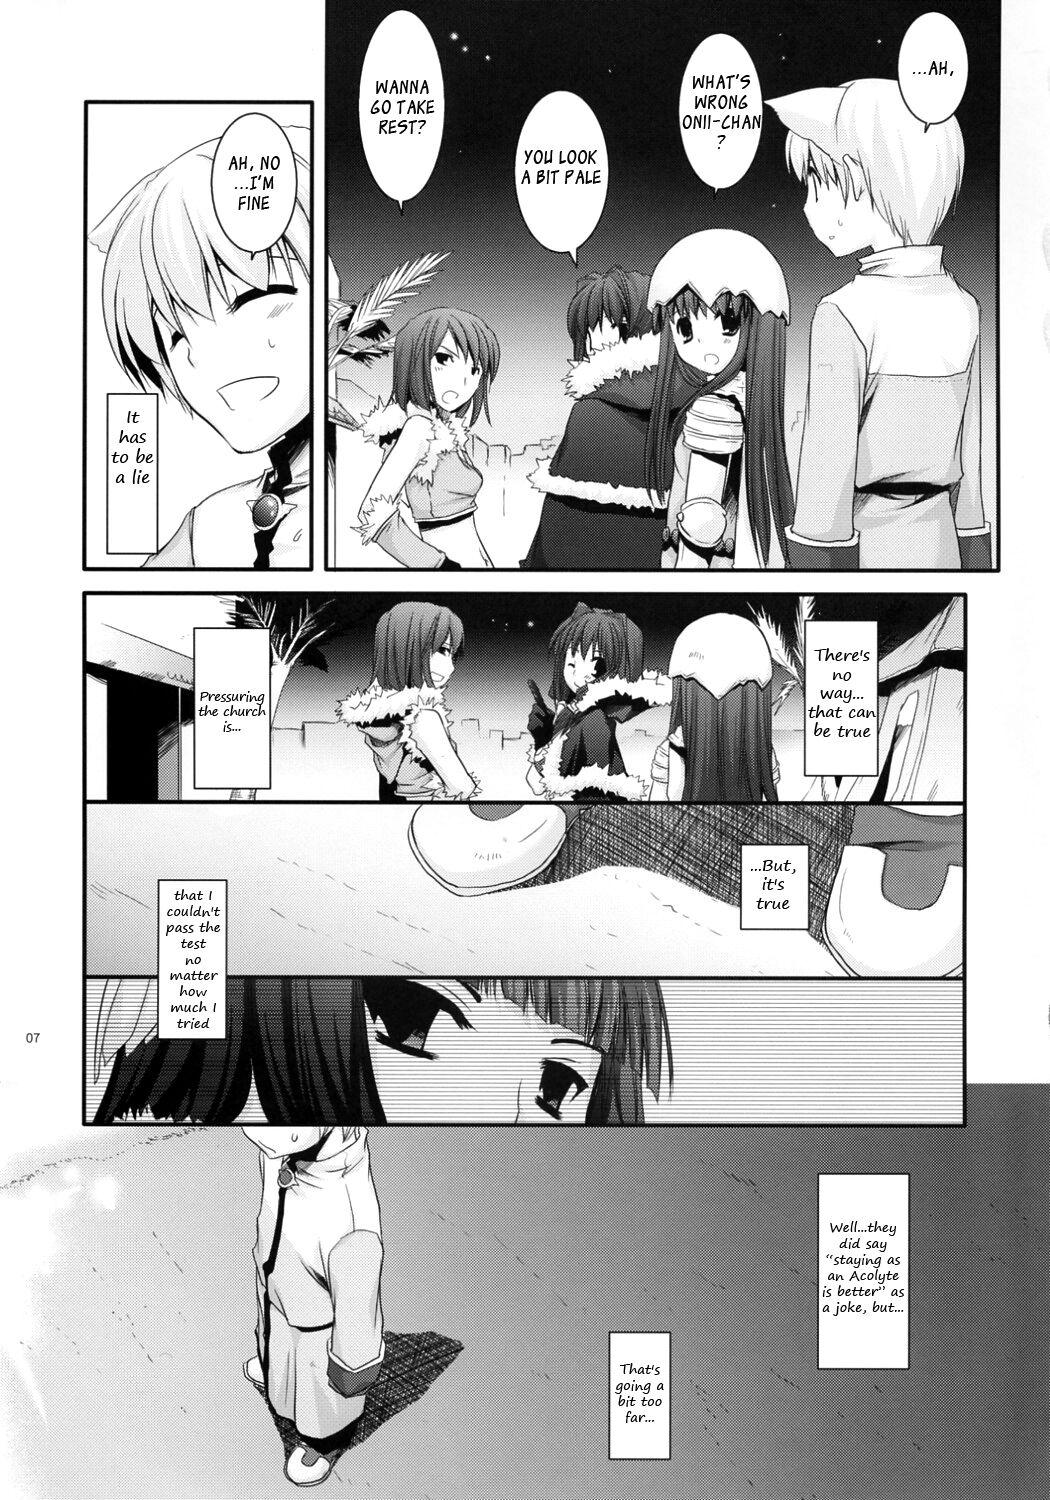 Topless D.L. Action 41 - Ragnarok online Animated - Page 8